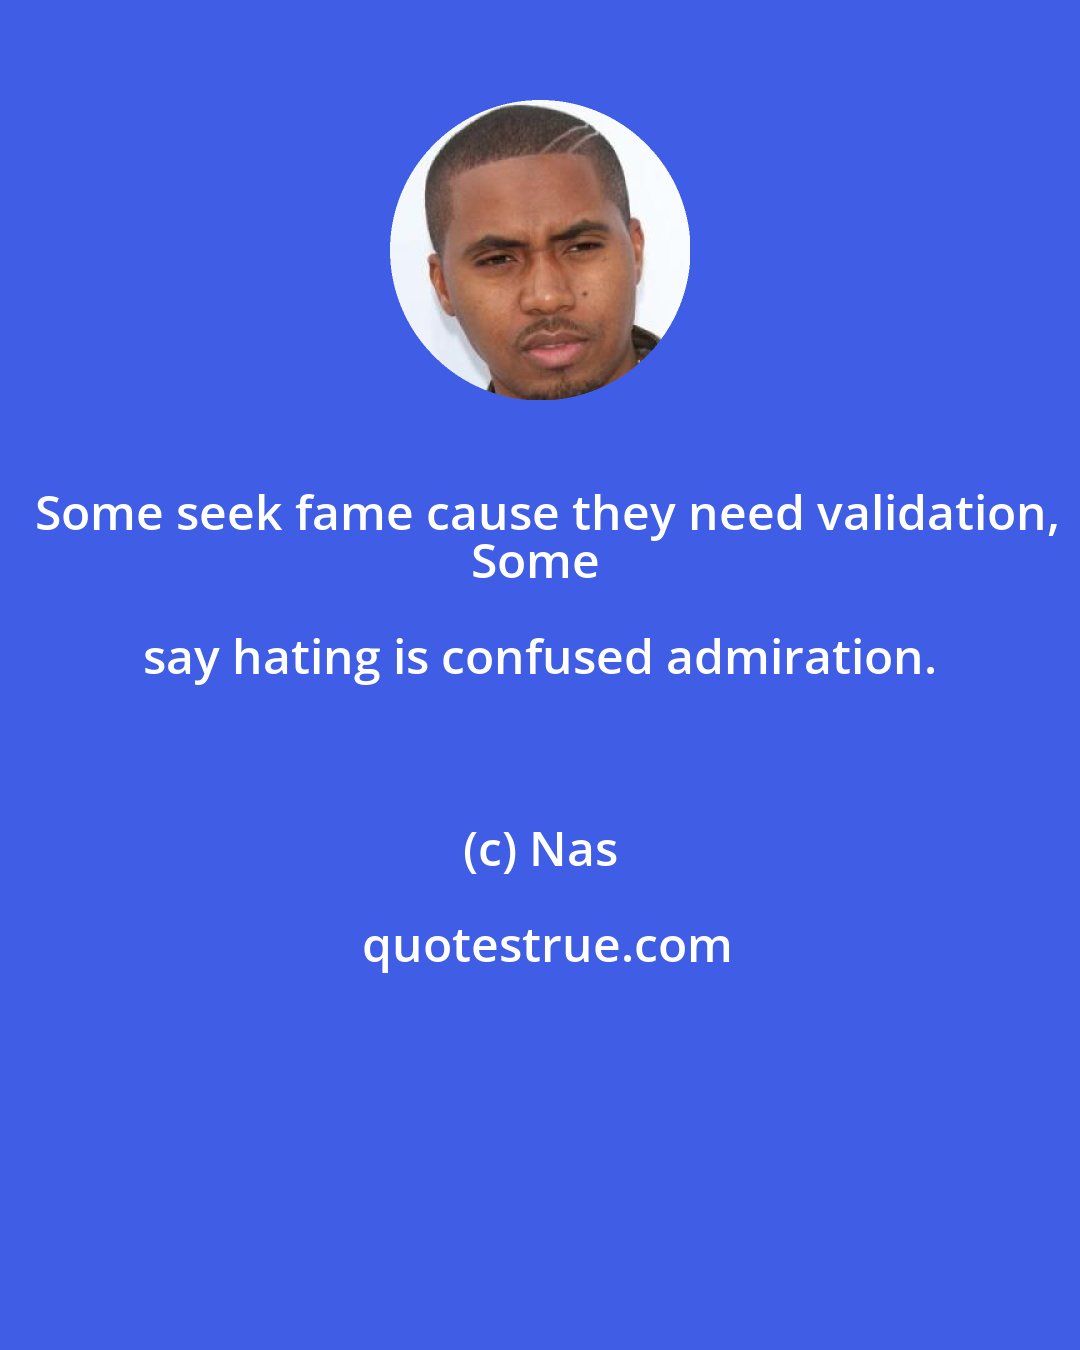 Nas: Some seek fame cause they need validation,
Some say hating is confused admiration.